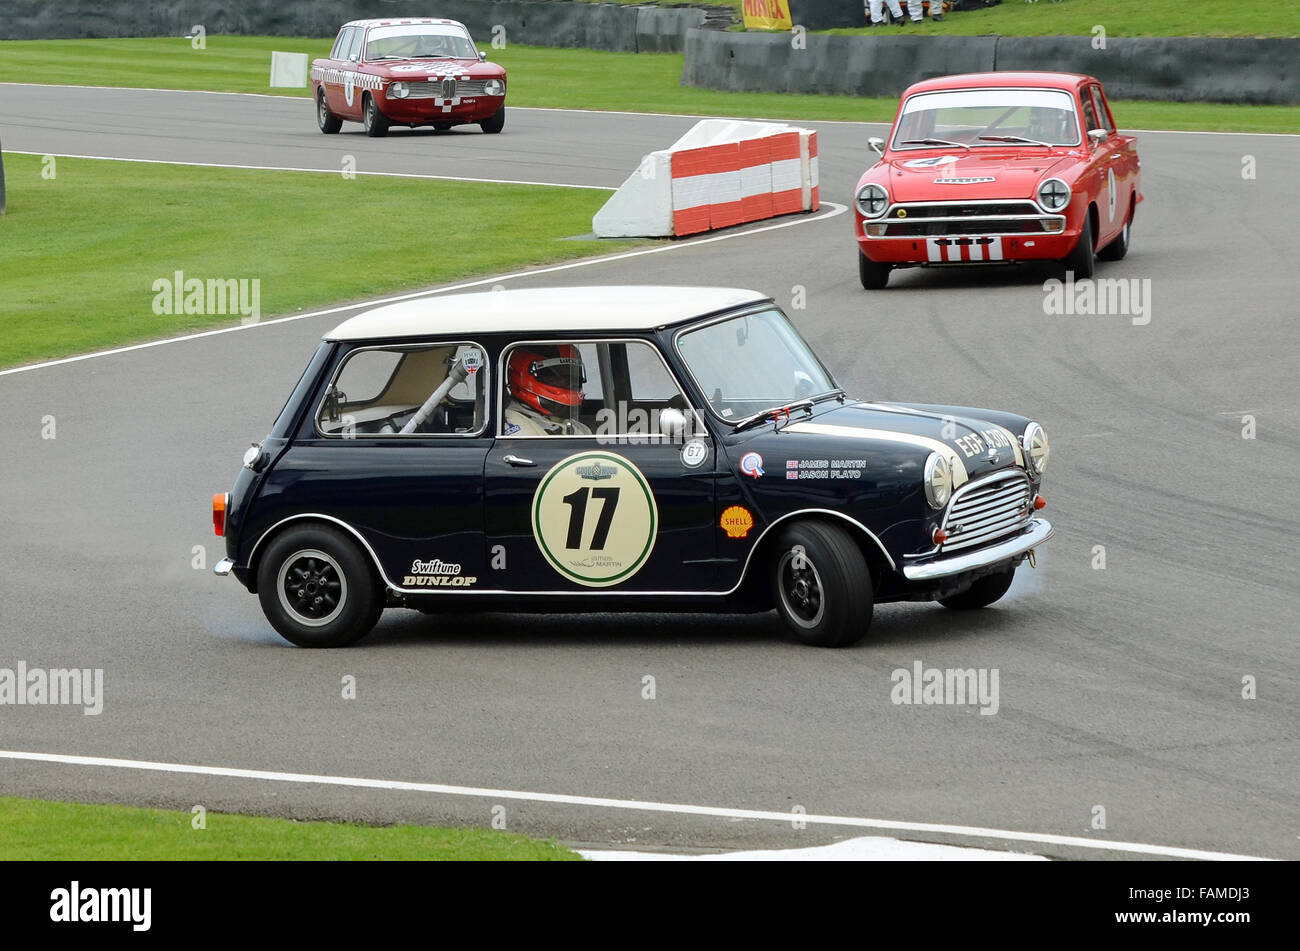 James Martin British chef and TV presenter best known for presenting the BBC's Saturday Kitchen. Owns and races a Mini, slid off at Goodwood Revival Stock Photo